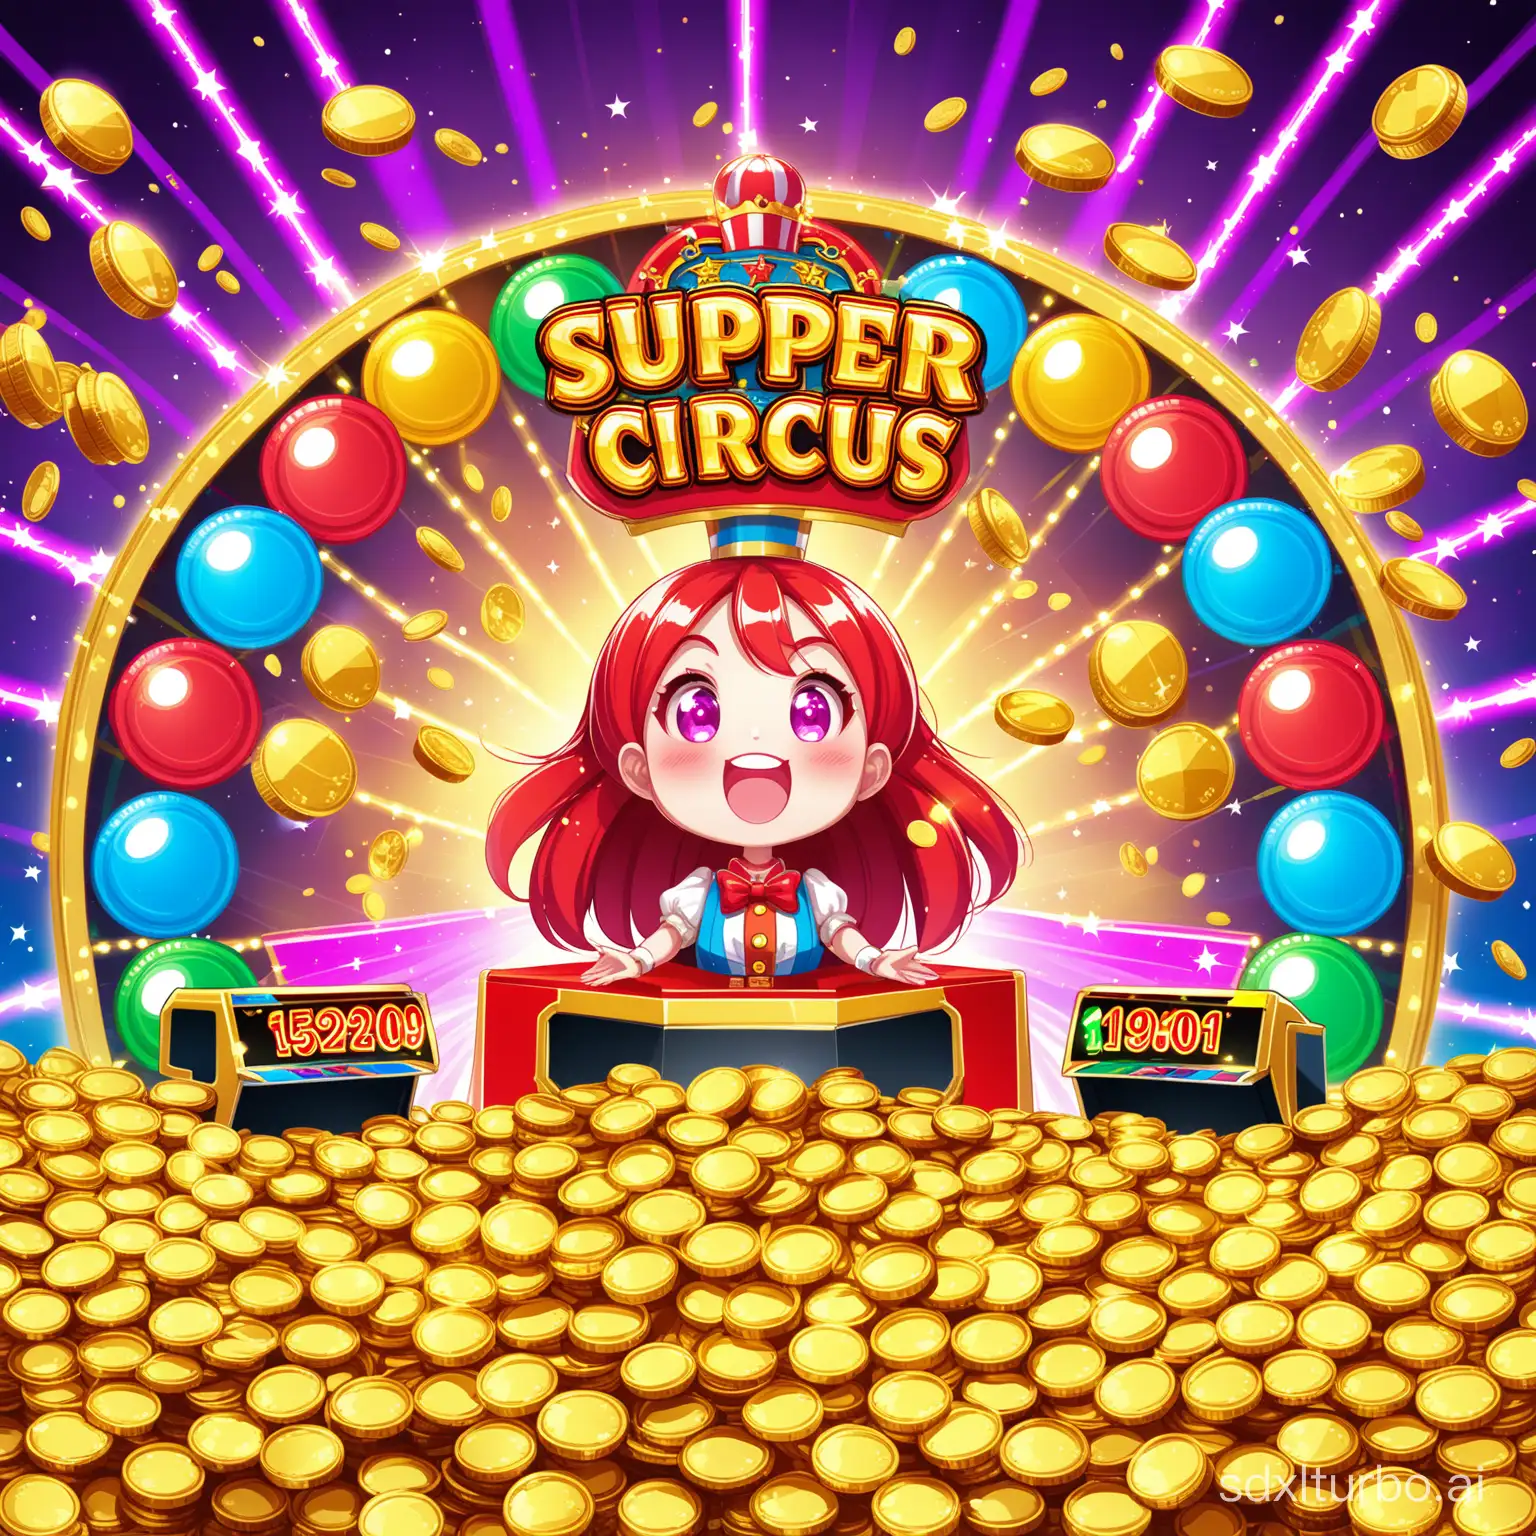 Super-Circus-Arcade-Game-Coin-Pusher-Jackpot-with-Gold-Coins-Explosion